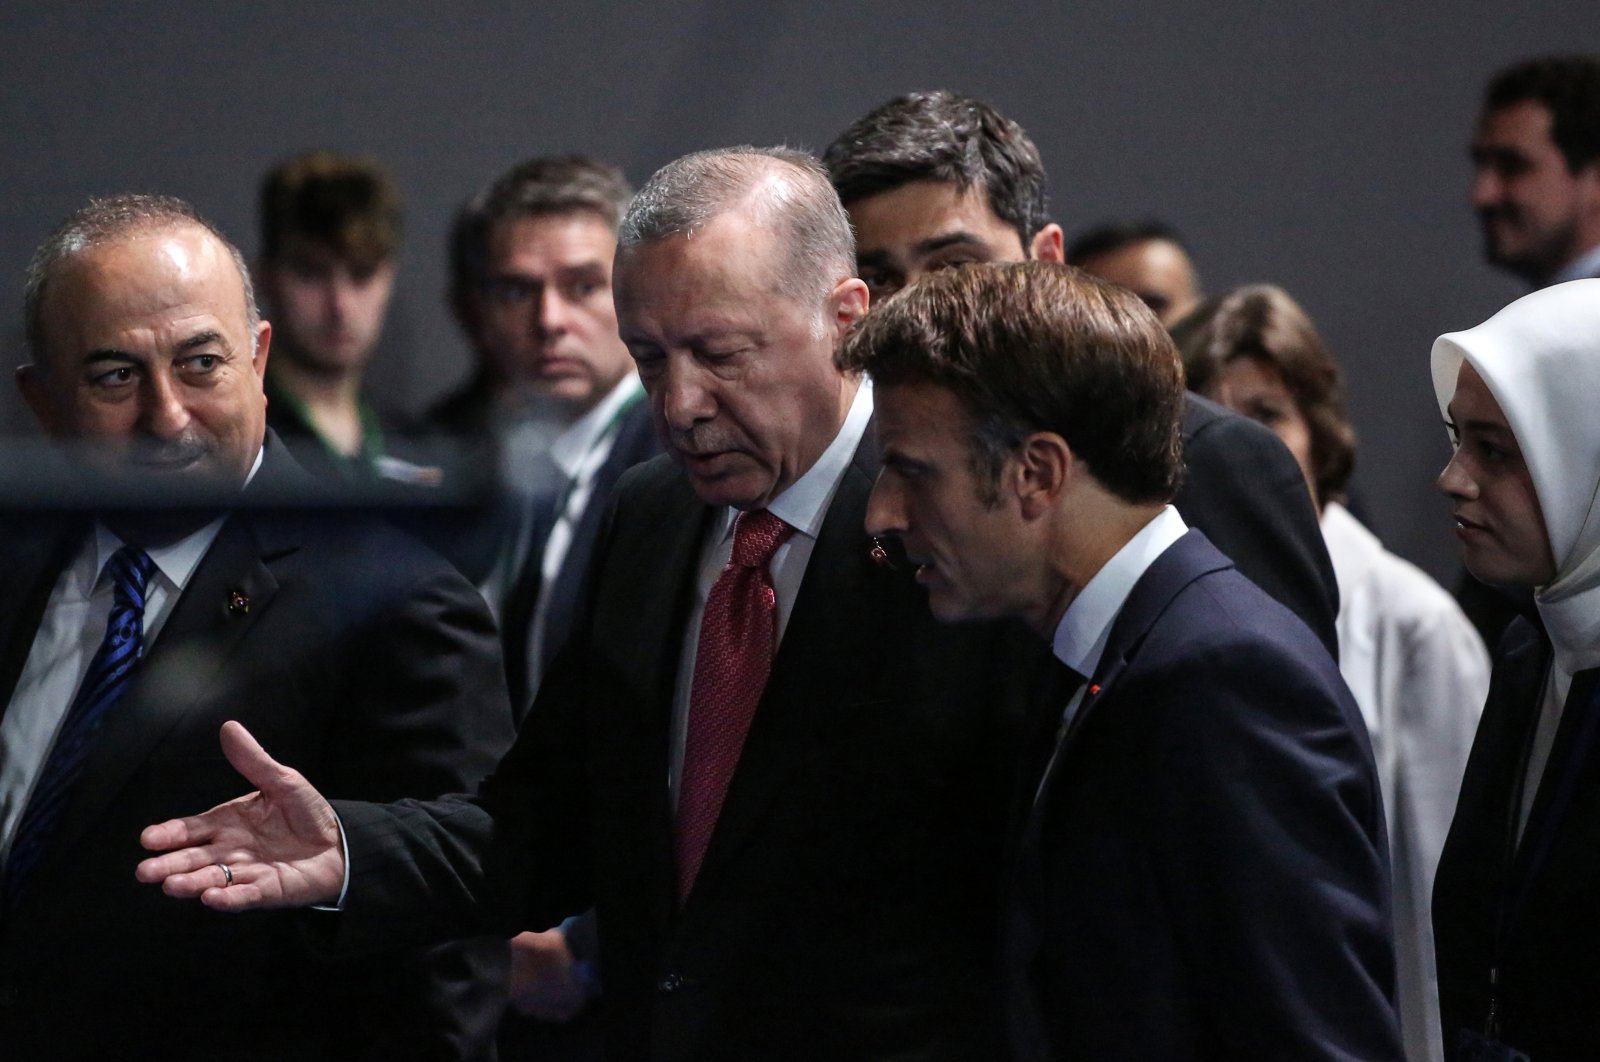 Turkish President Recep Tayyip Erdoğan (L) and French President Emmanuel Macron (R) on day two of the NATO summit at the Ifema Congress Center in Madrid, Spain, June 29, 2022. (Getty Photo)